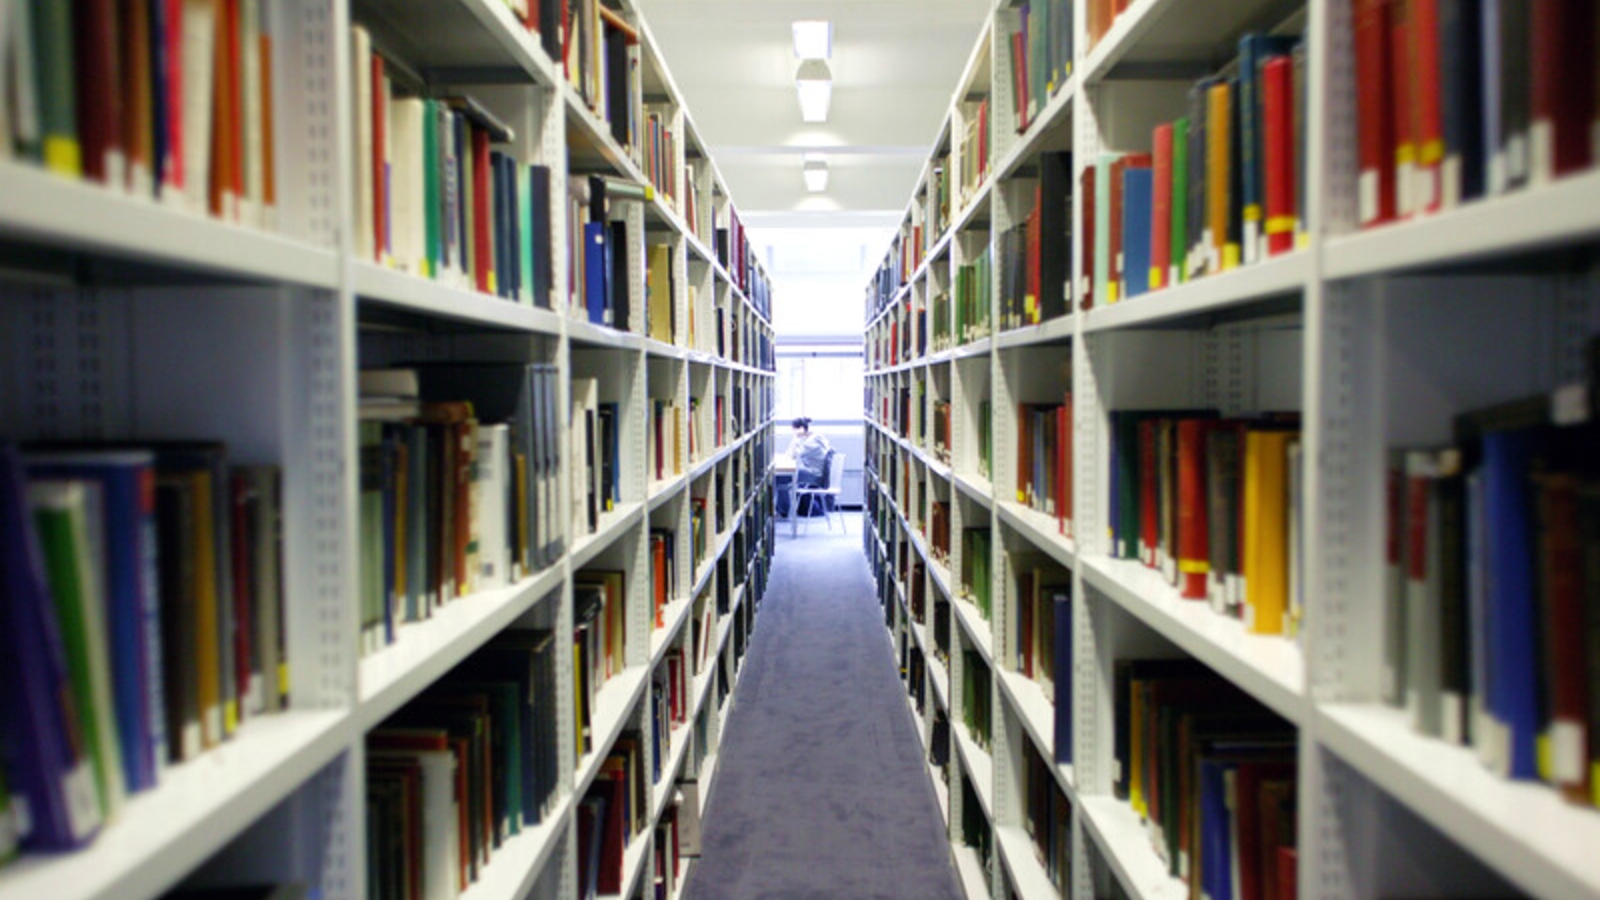 A view between two book stacks looking outward towards a study desk where a student is seated in the distance.